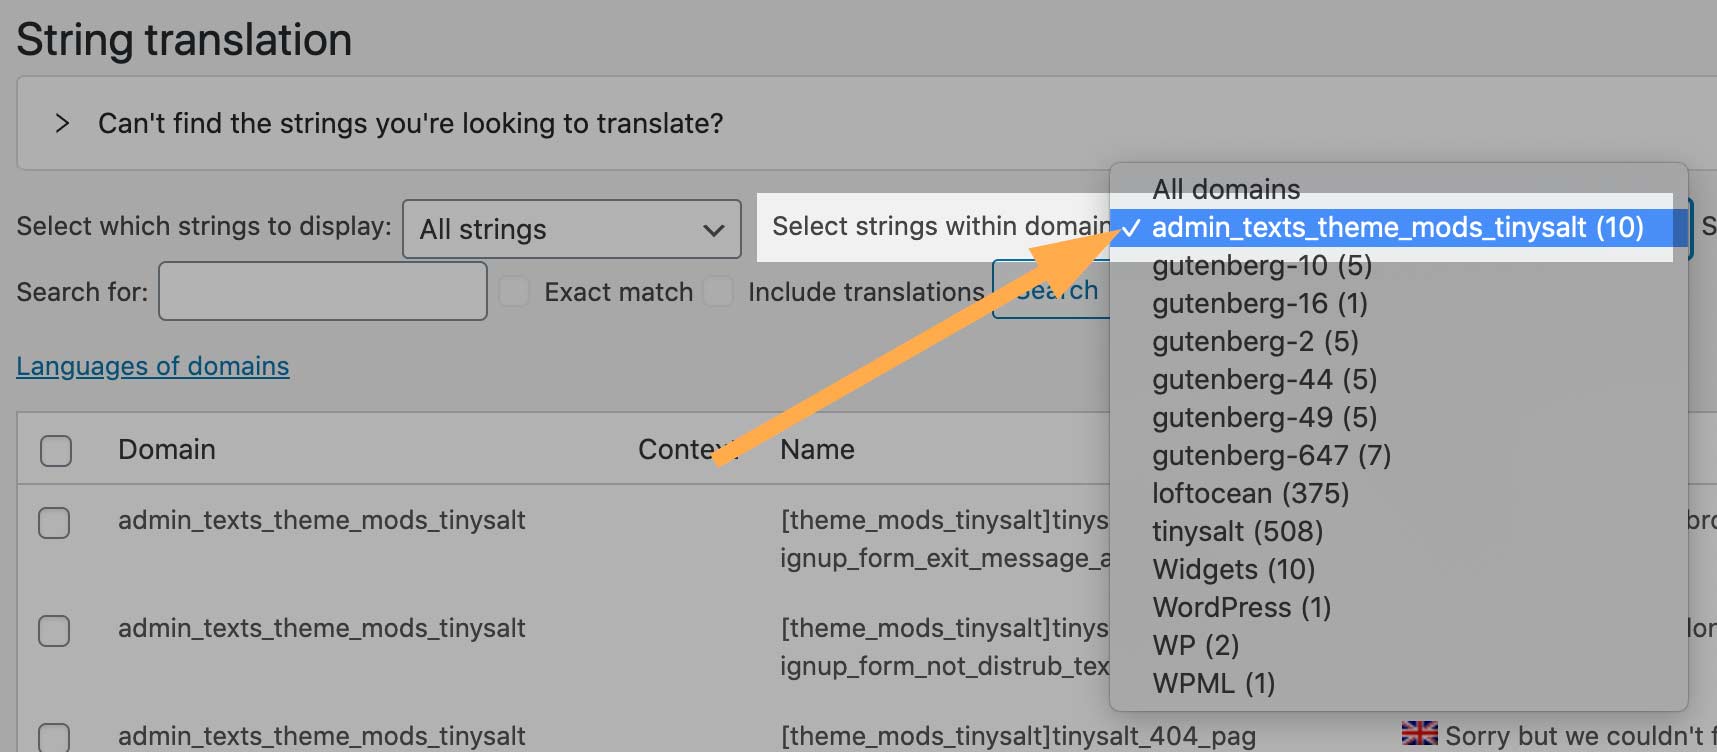 Select string within domain - for text added in customizer